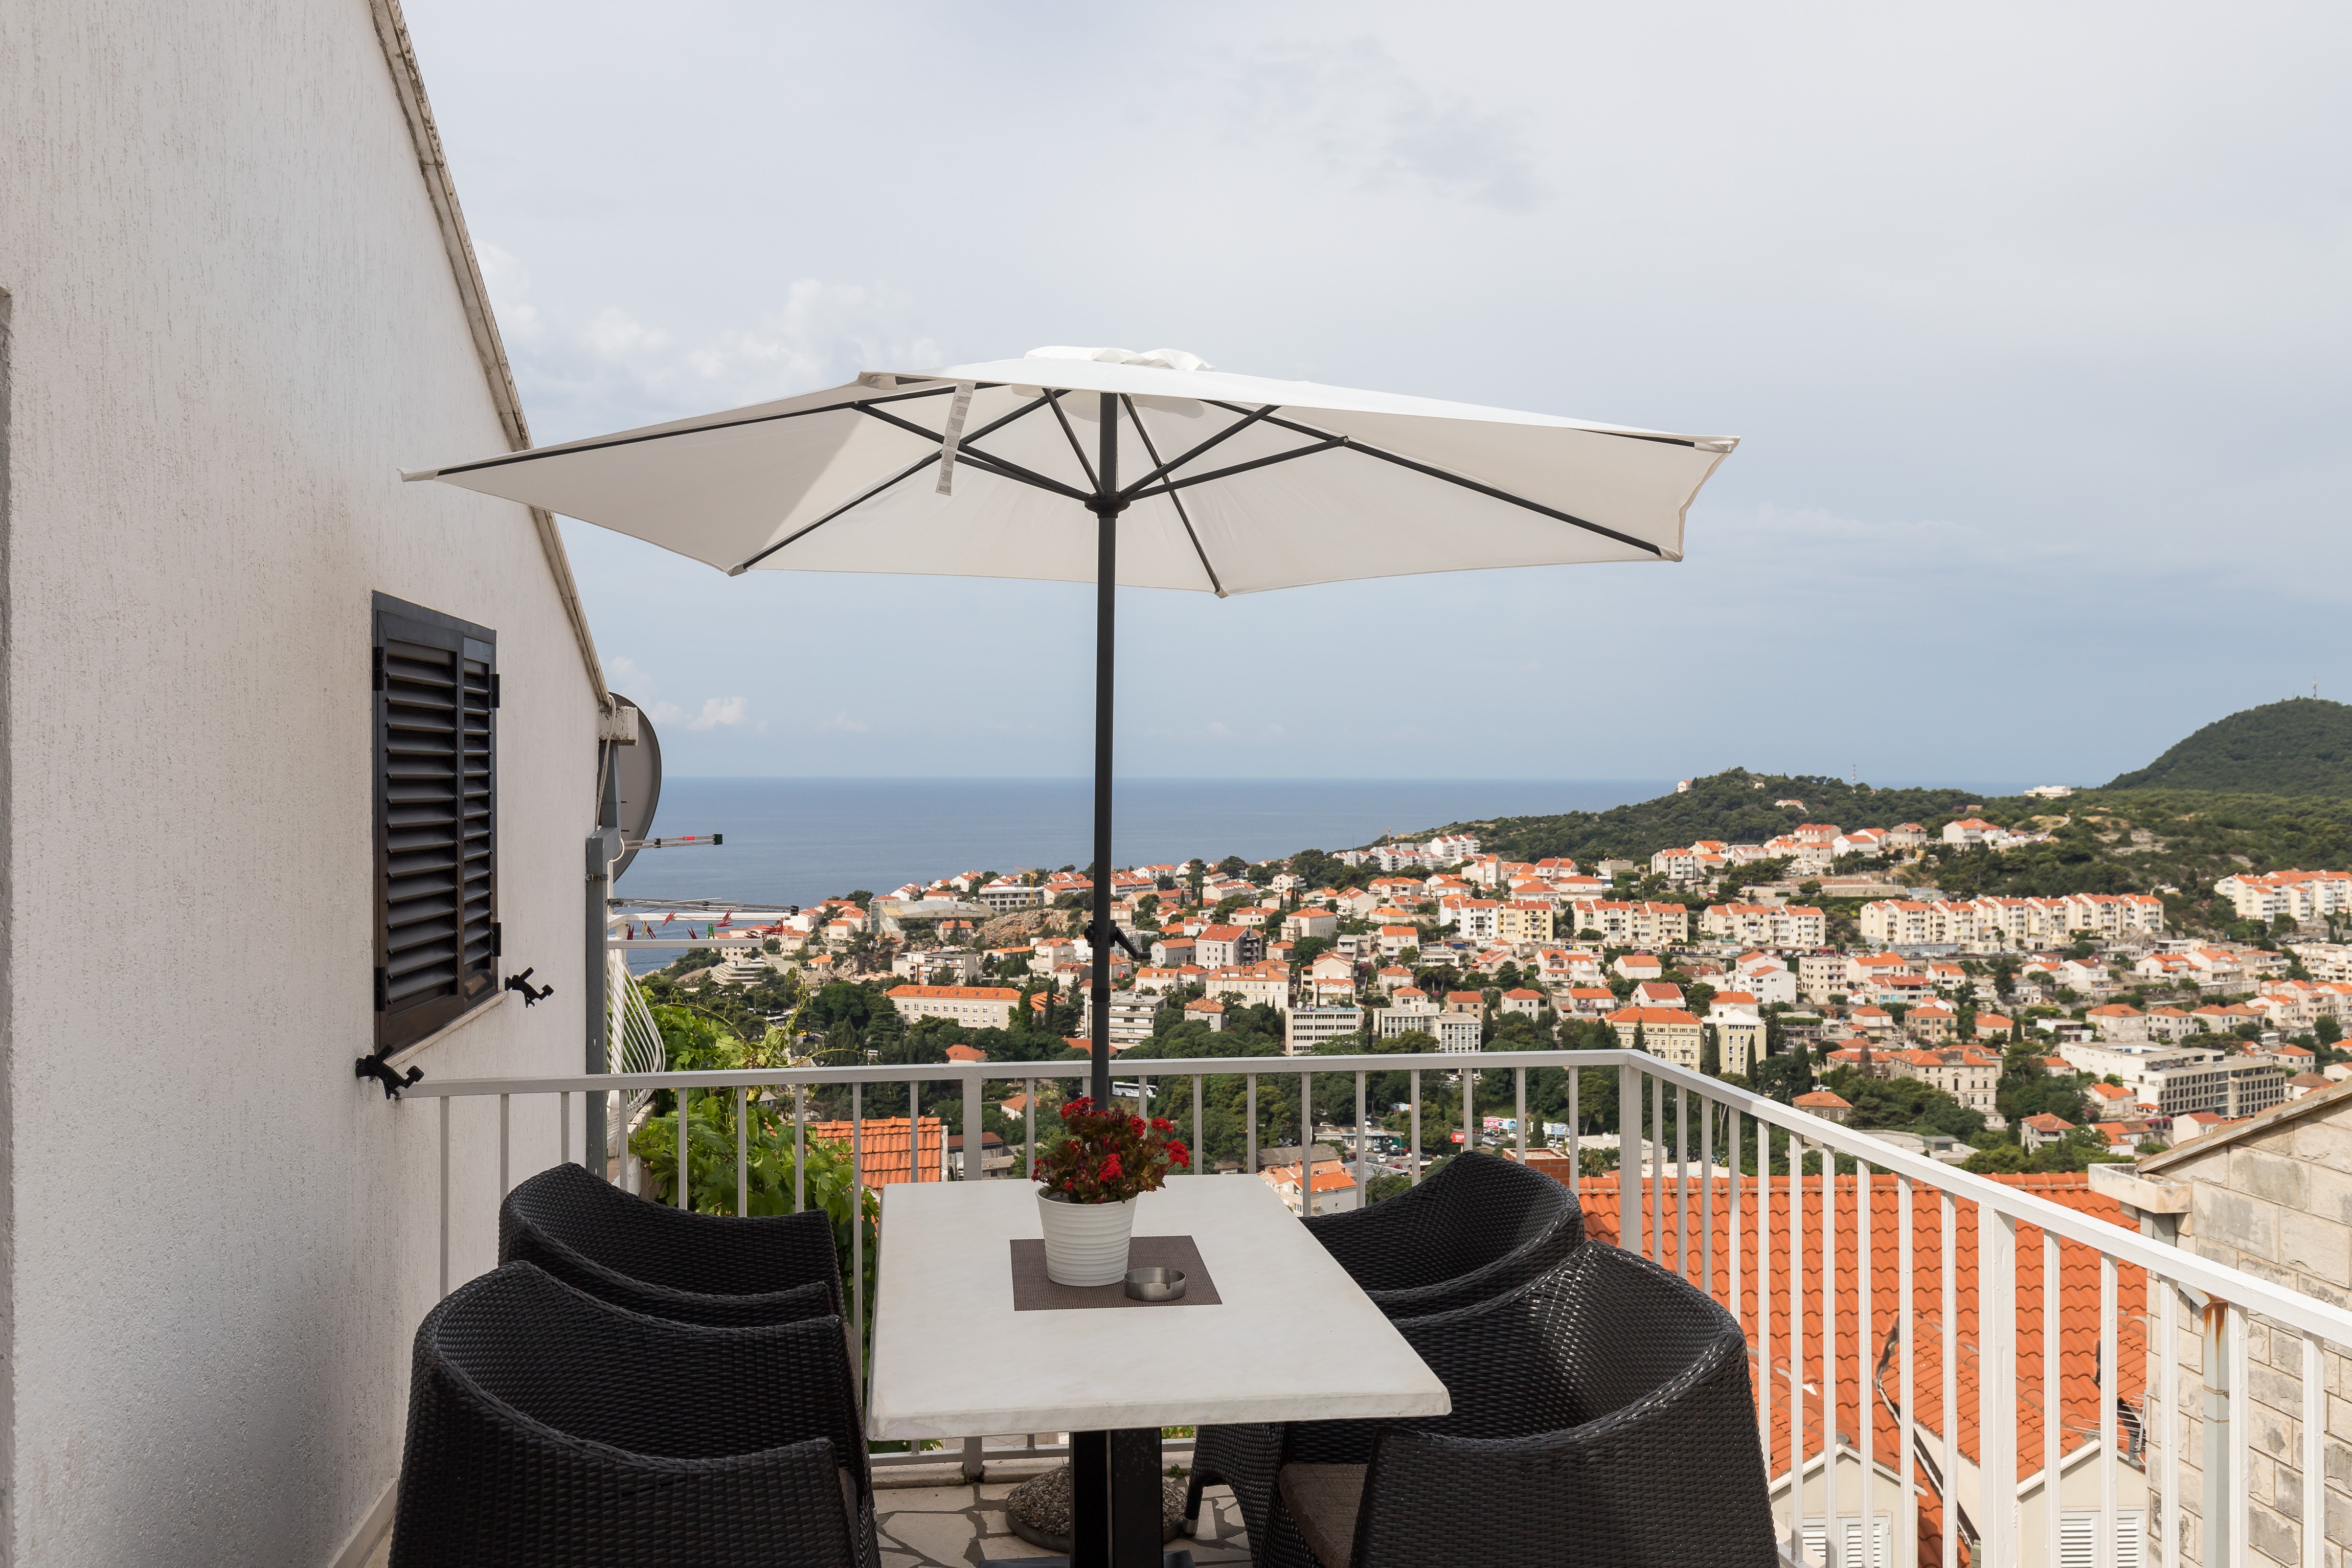 Guest House Kono - One-Bedroom Apartment with Pati   Dubrovnik